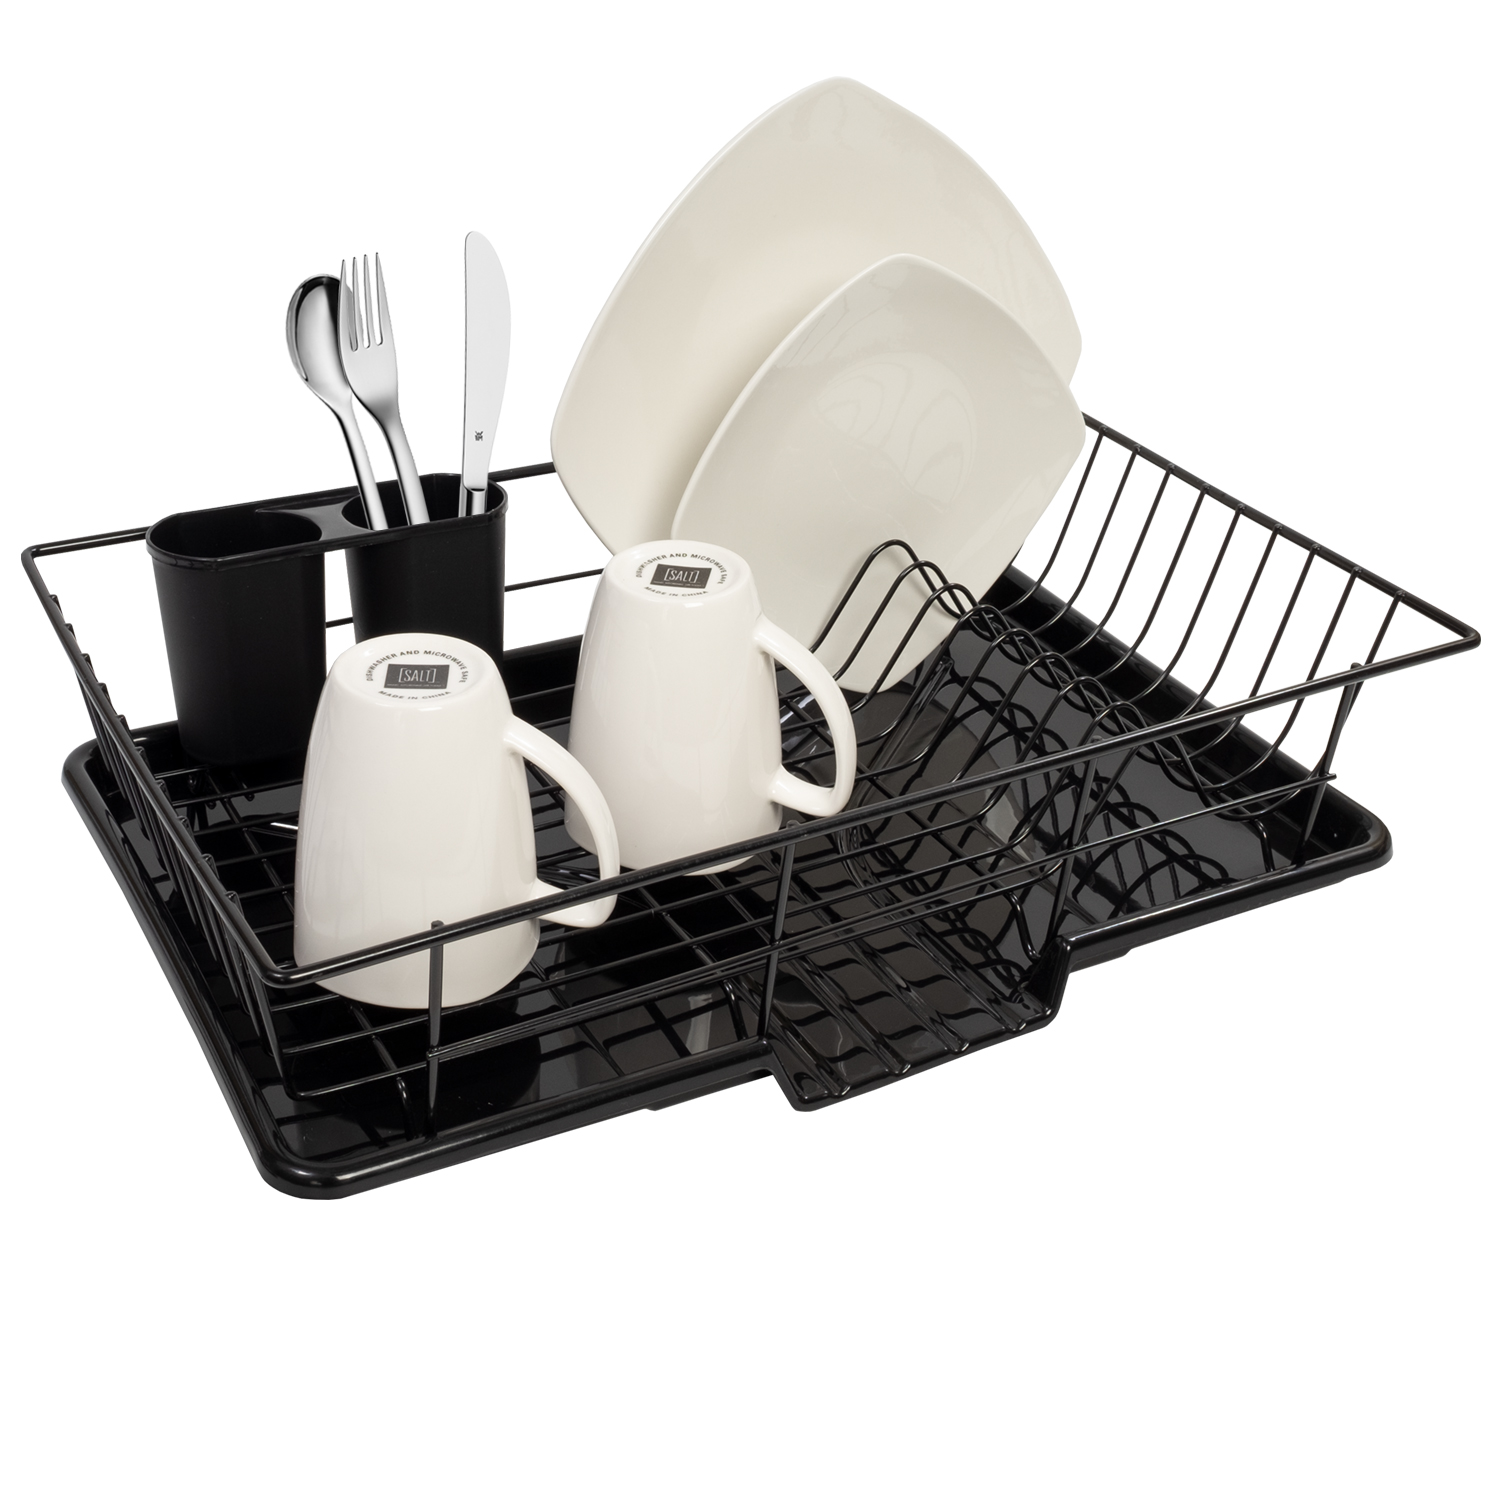 Sweet Home Collection 3-Piece Kitchen Sink Dish Drainer Set- Black - image 1 of 4